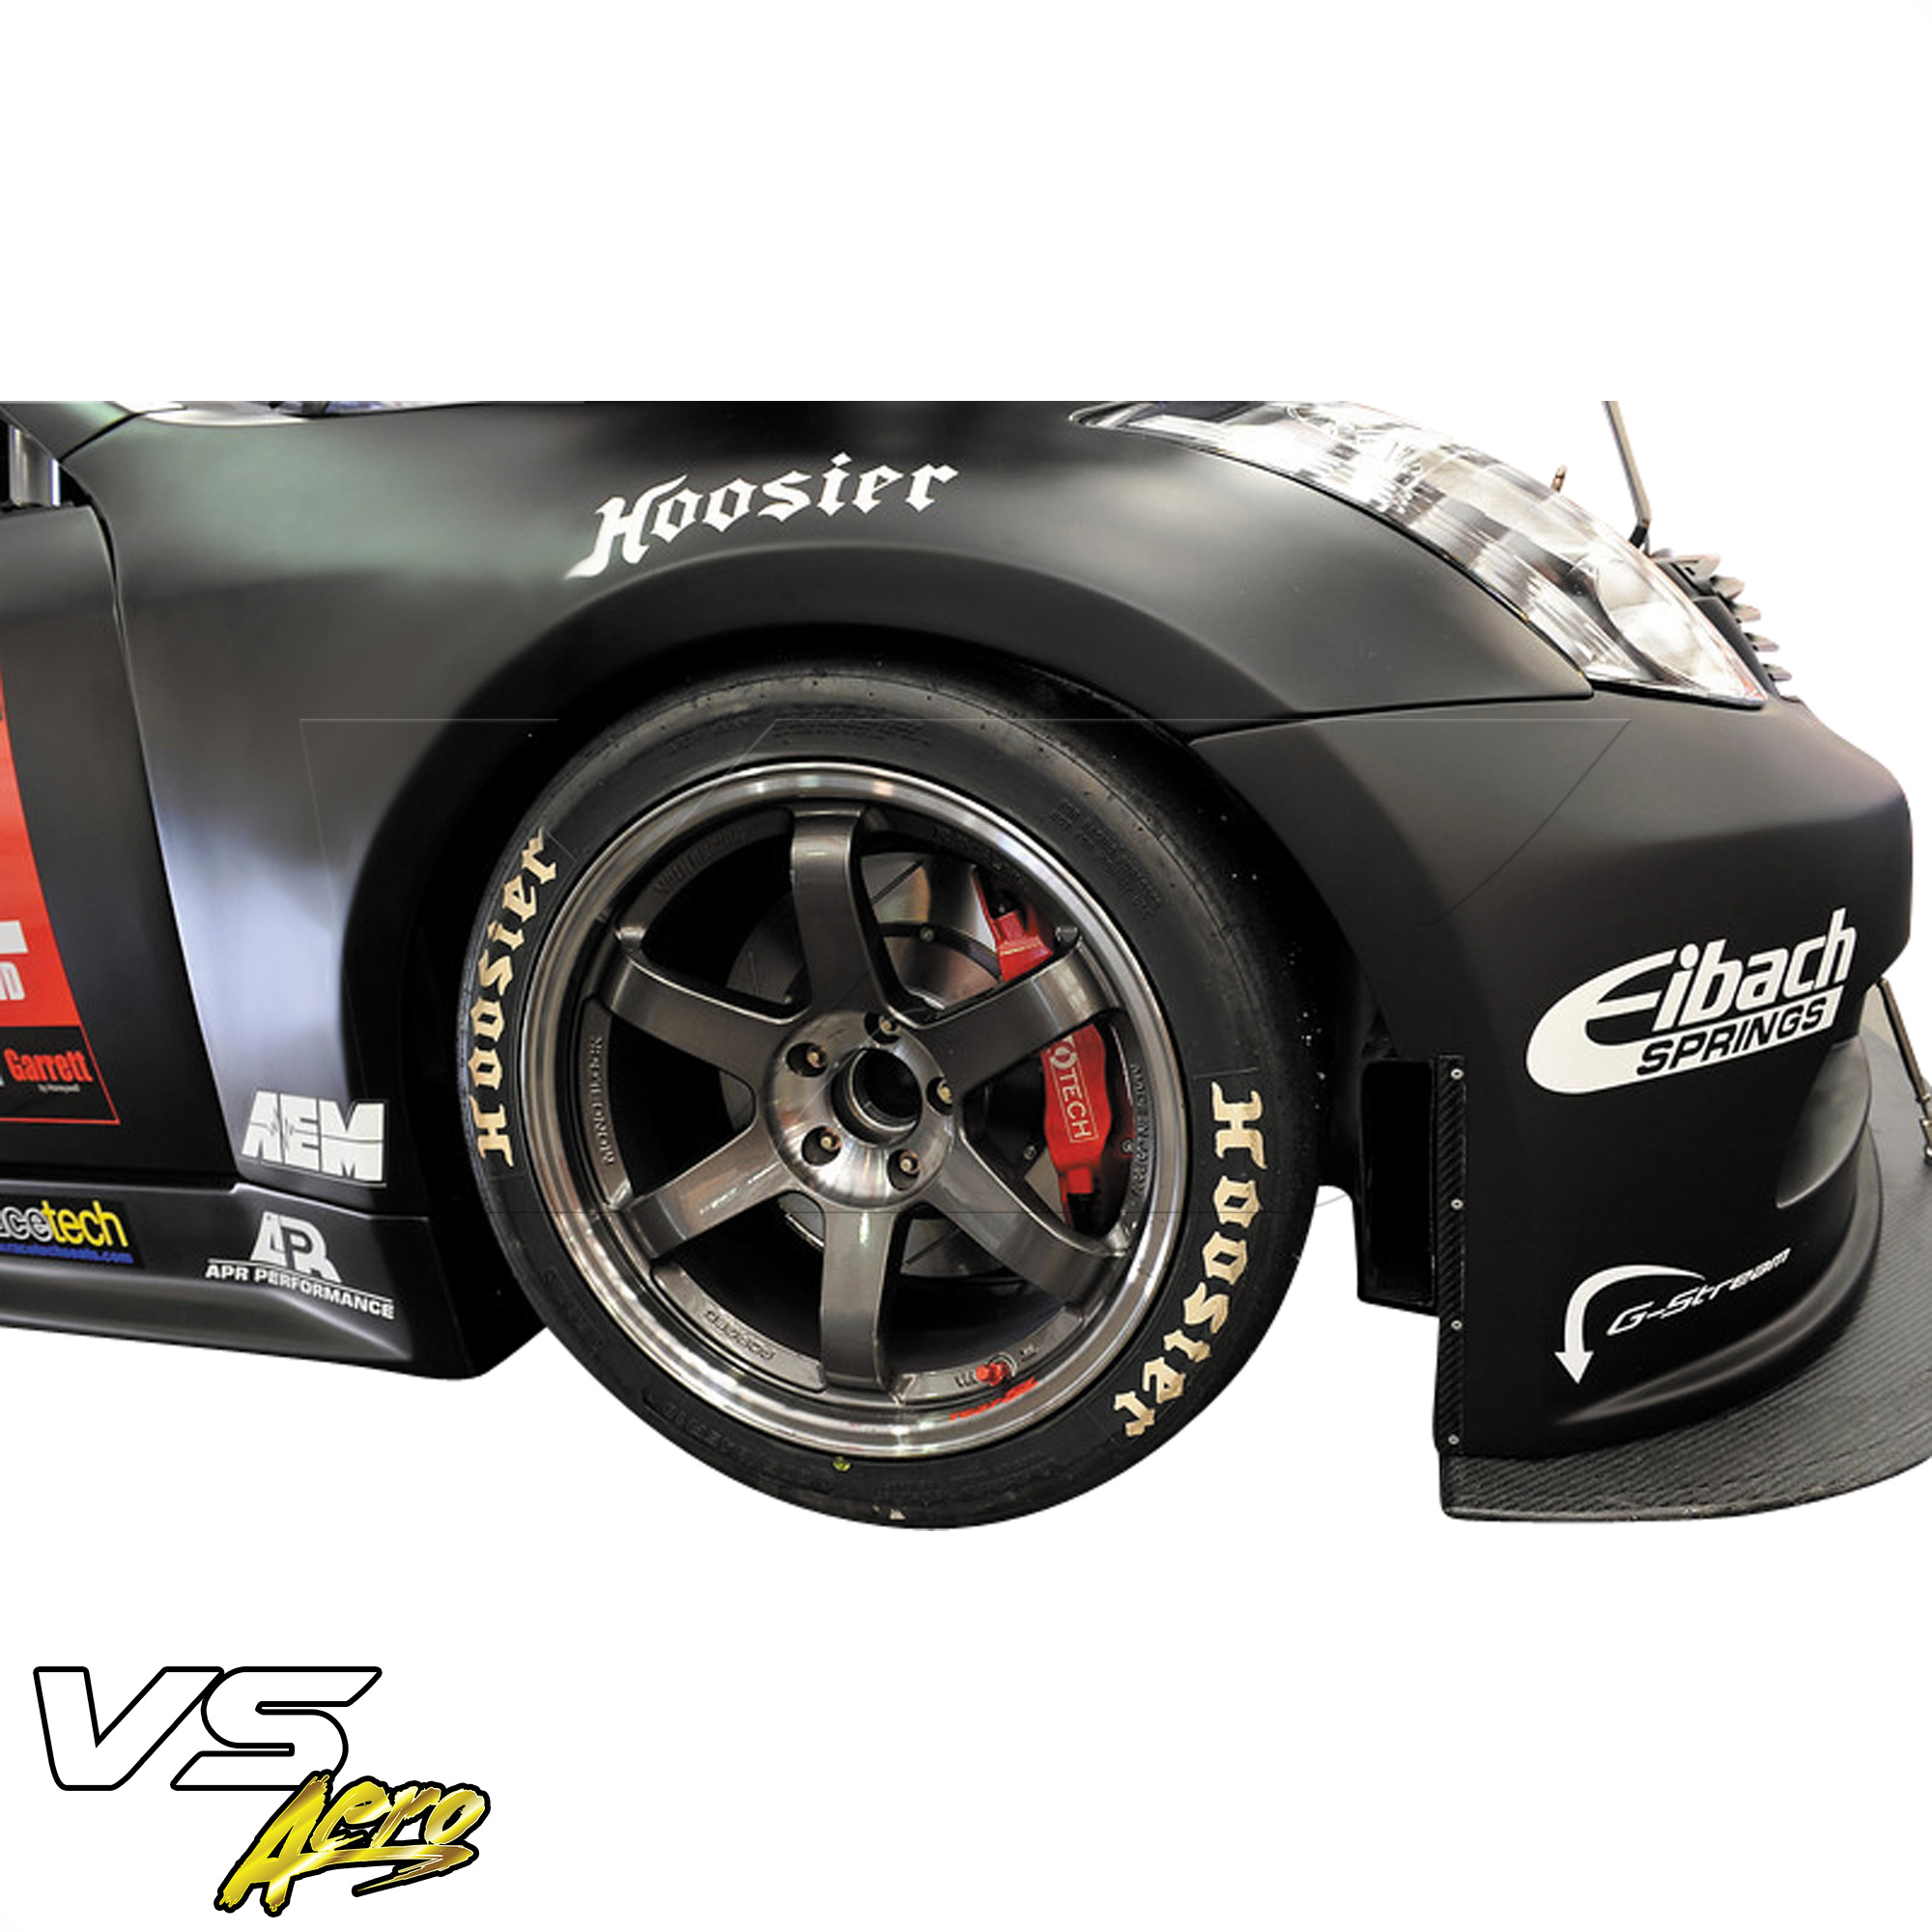 VSaero FRP APBR Wide Body Fenders (front) > Infiniti G35 Coupe 2003-2006 > 2dr Coupe - Image 12